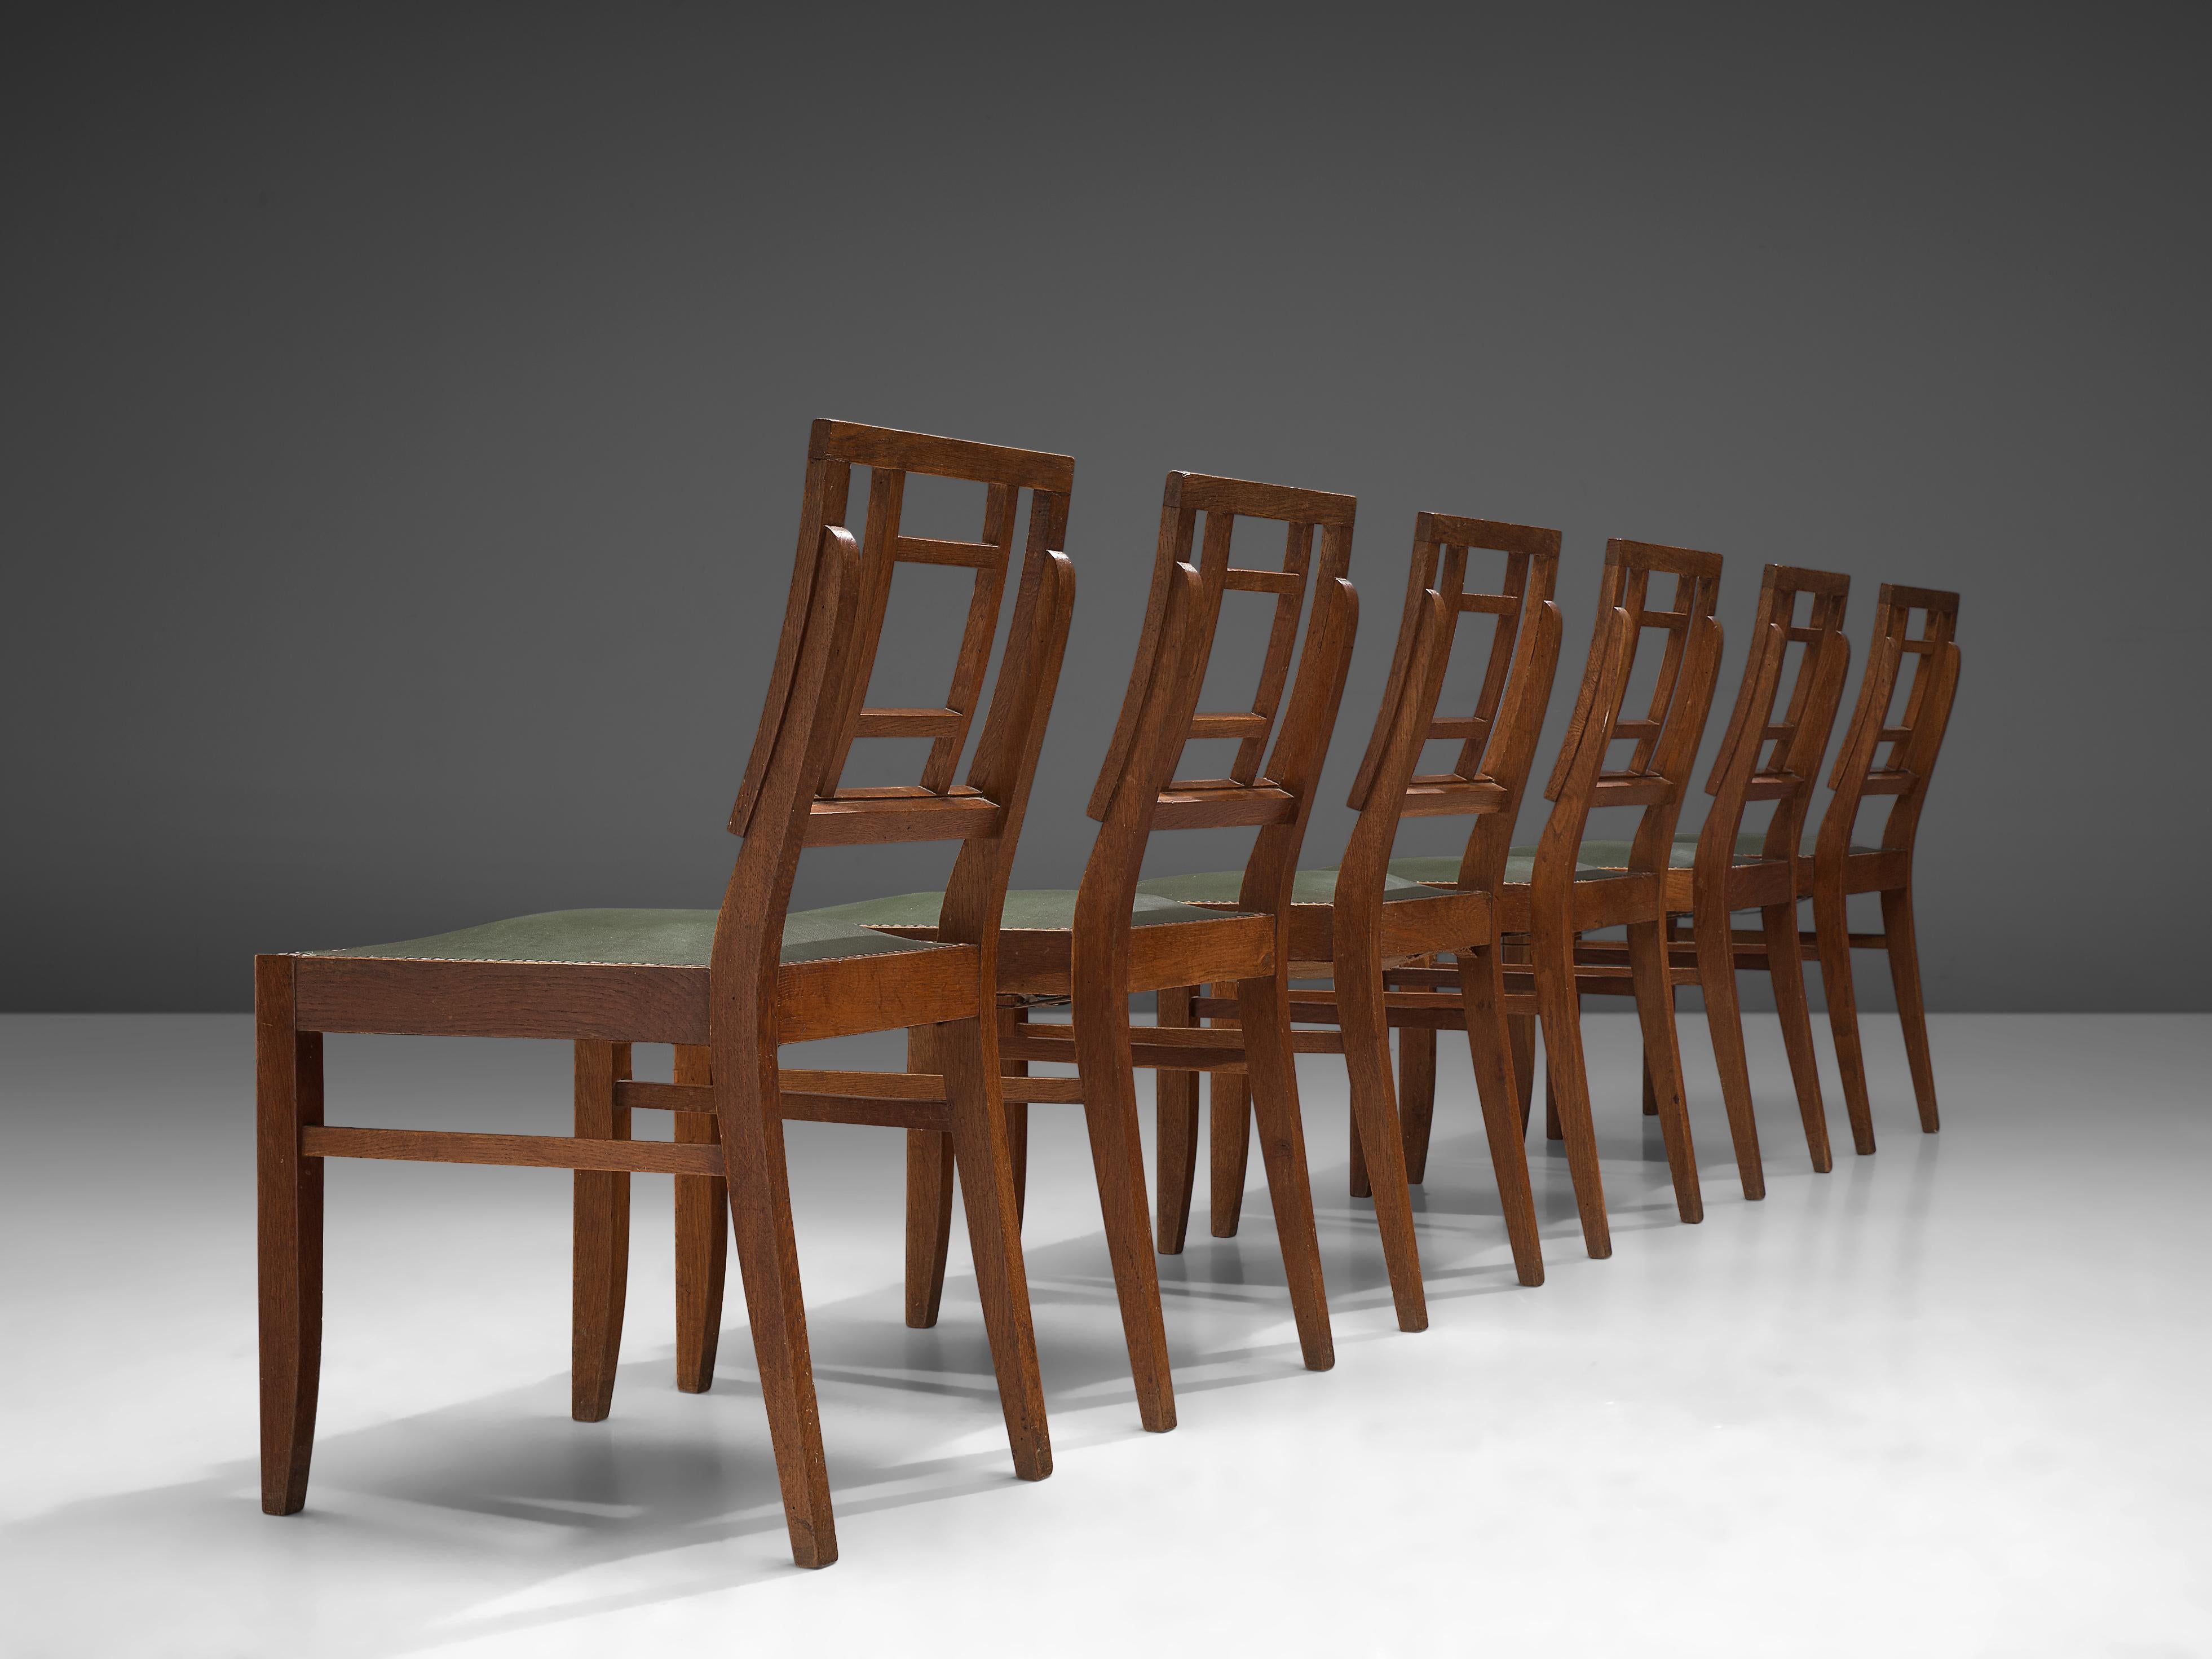 Set of six dining chairs, oak, metal, faux leather, France, 1940s

This set of French dining chairs show a basic design, with strong proportions. The geometric backrest is a typical feature from the Art Deco, which also gives the chair an open